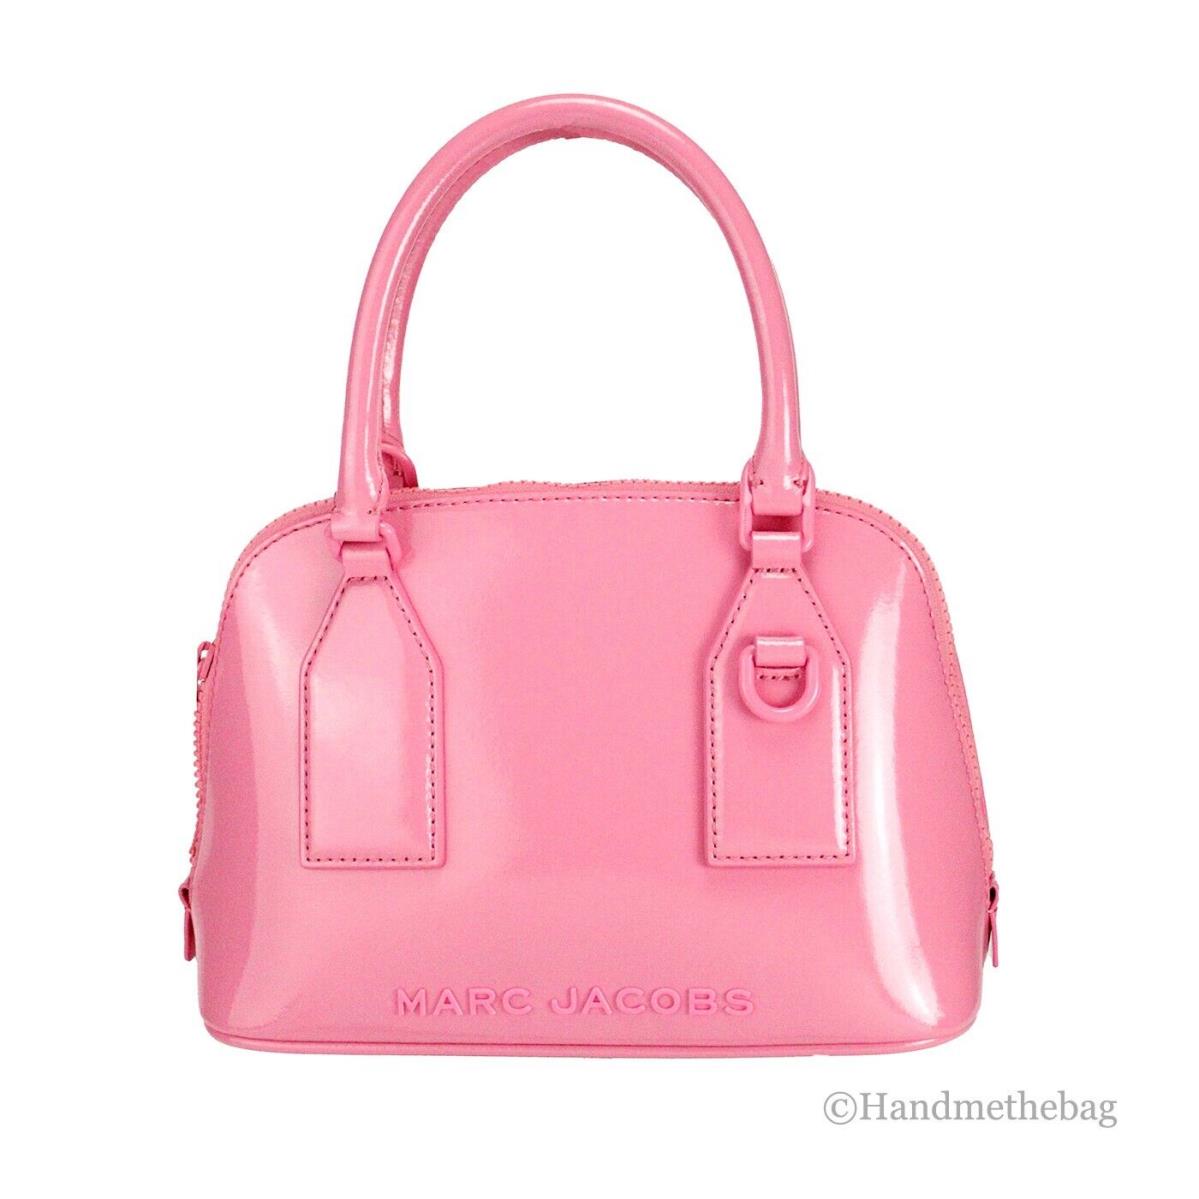 Marc Jacobs Small Candy Pink Patent Leather Dome Satchel Crossbody Bag